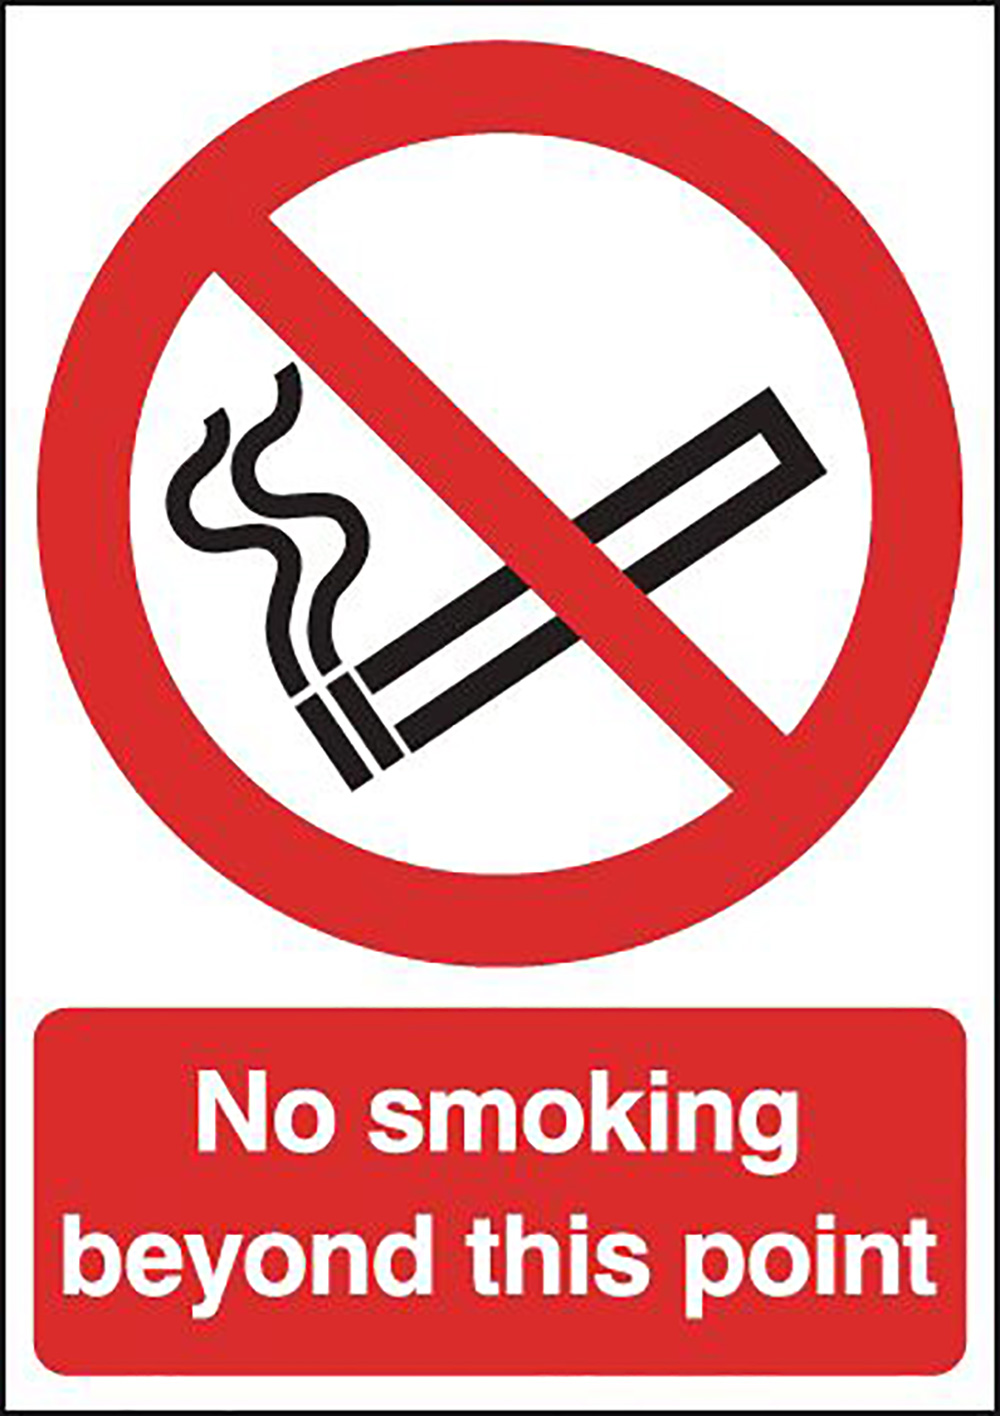 No Smoking Beyond This Point  297x210mm Self Adhesive Vinyl Safety Sign  